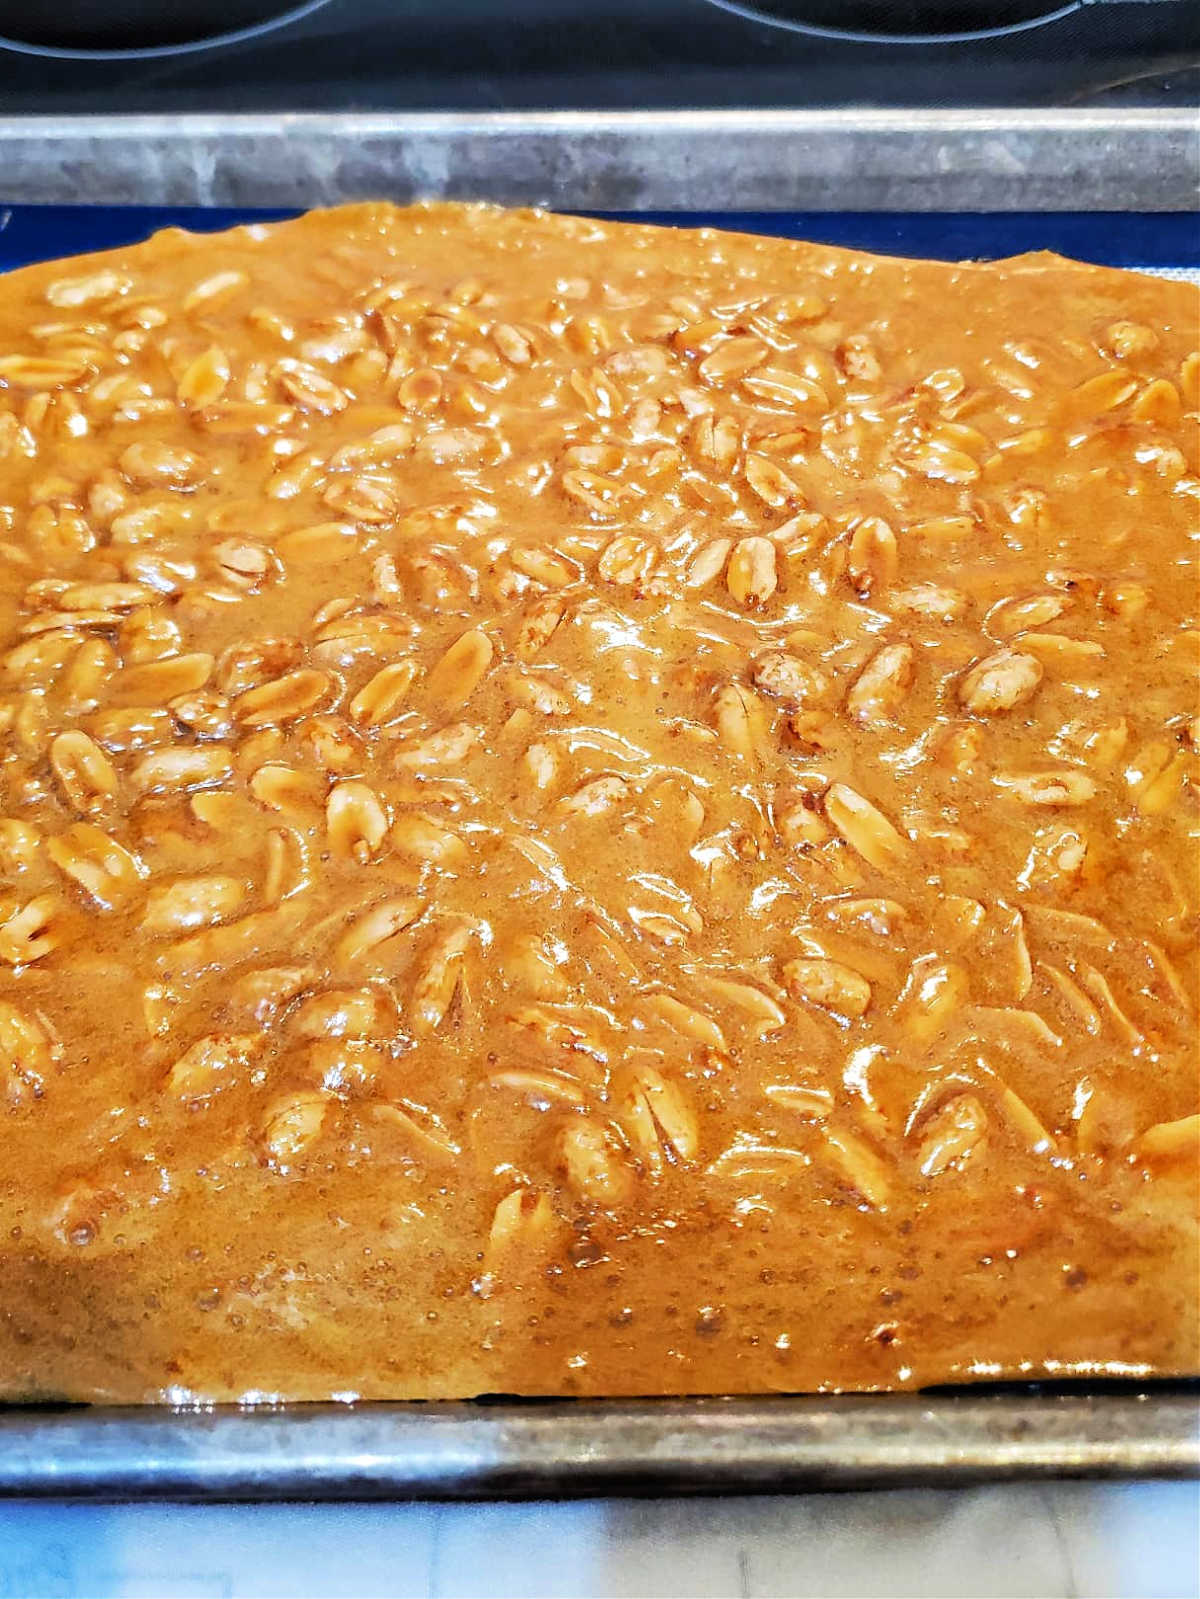 Peanut brittle cooling in a pan.